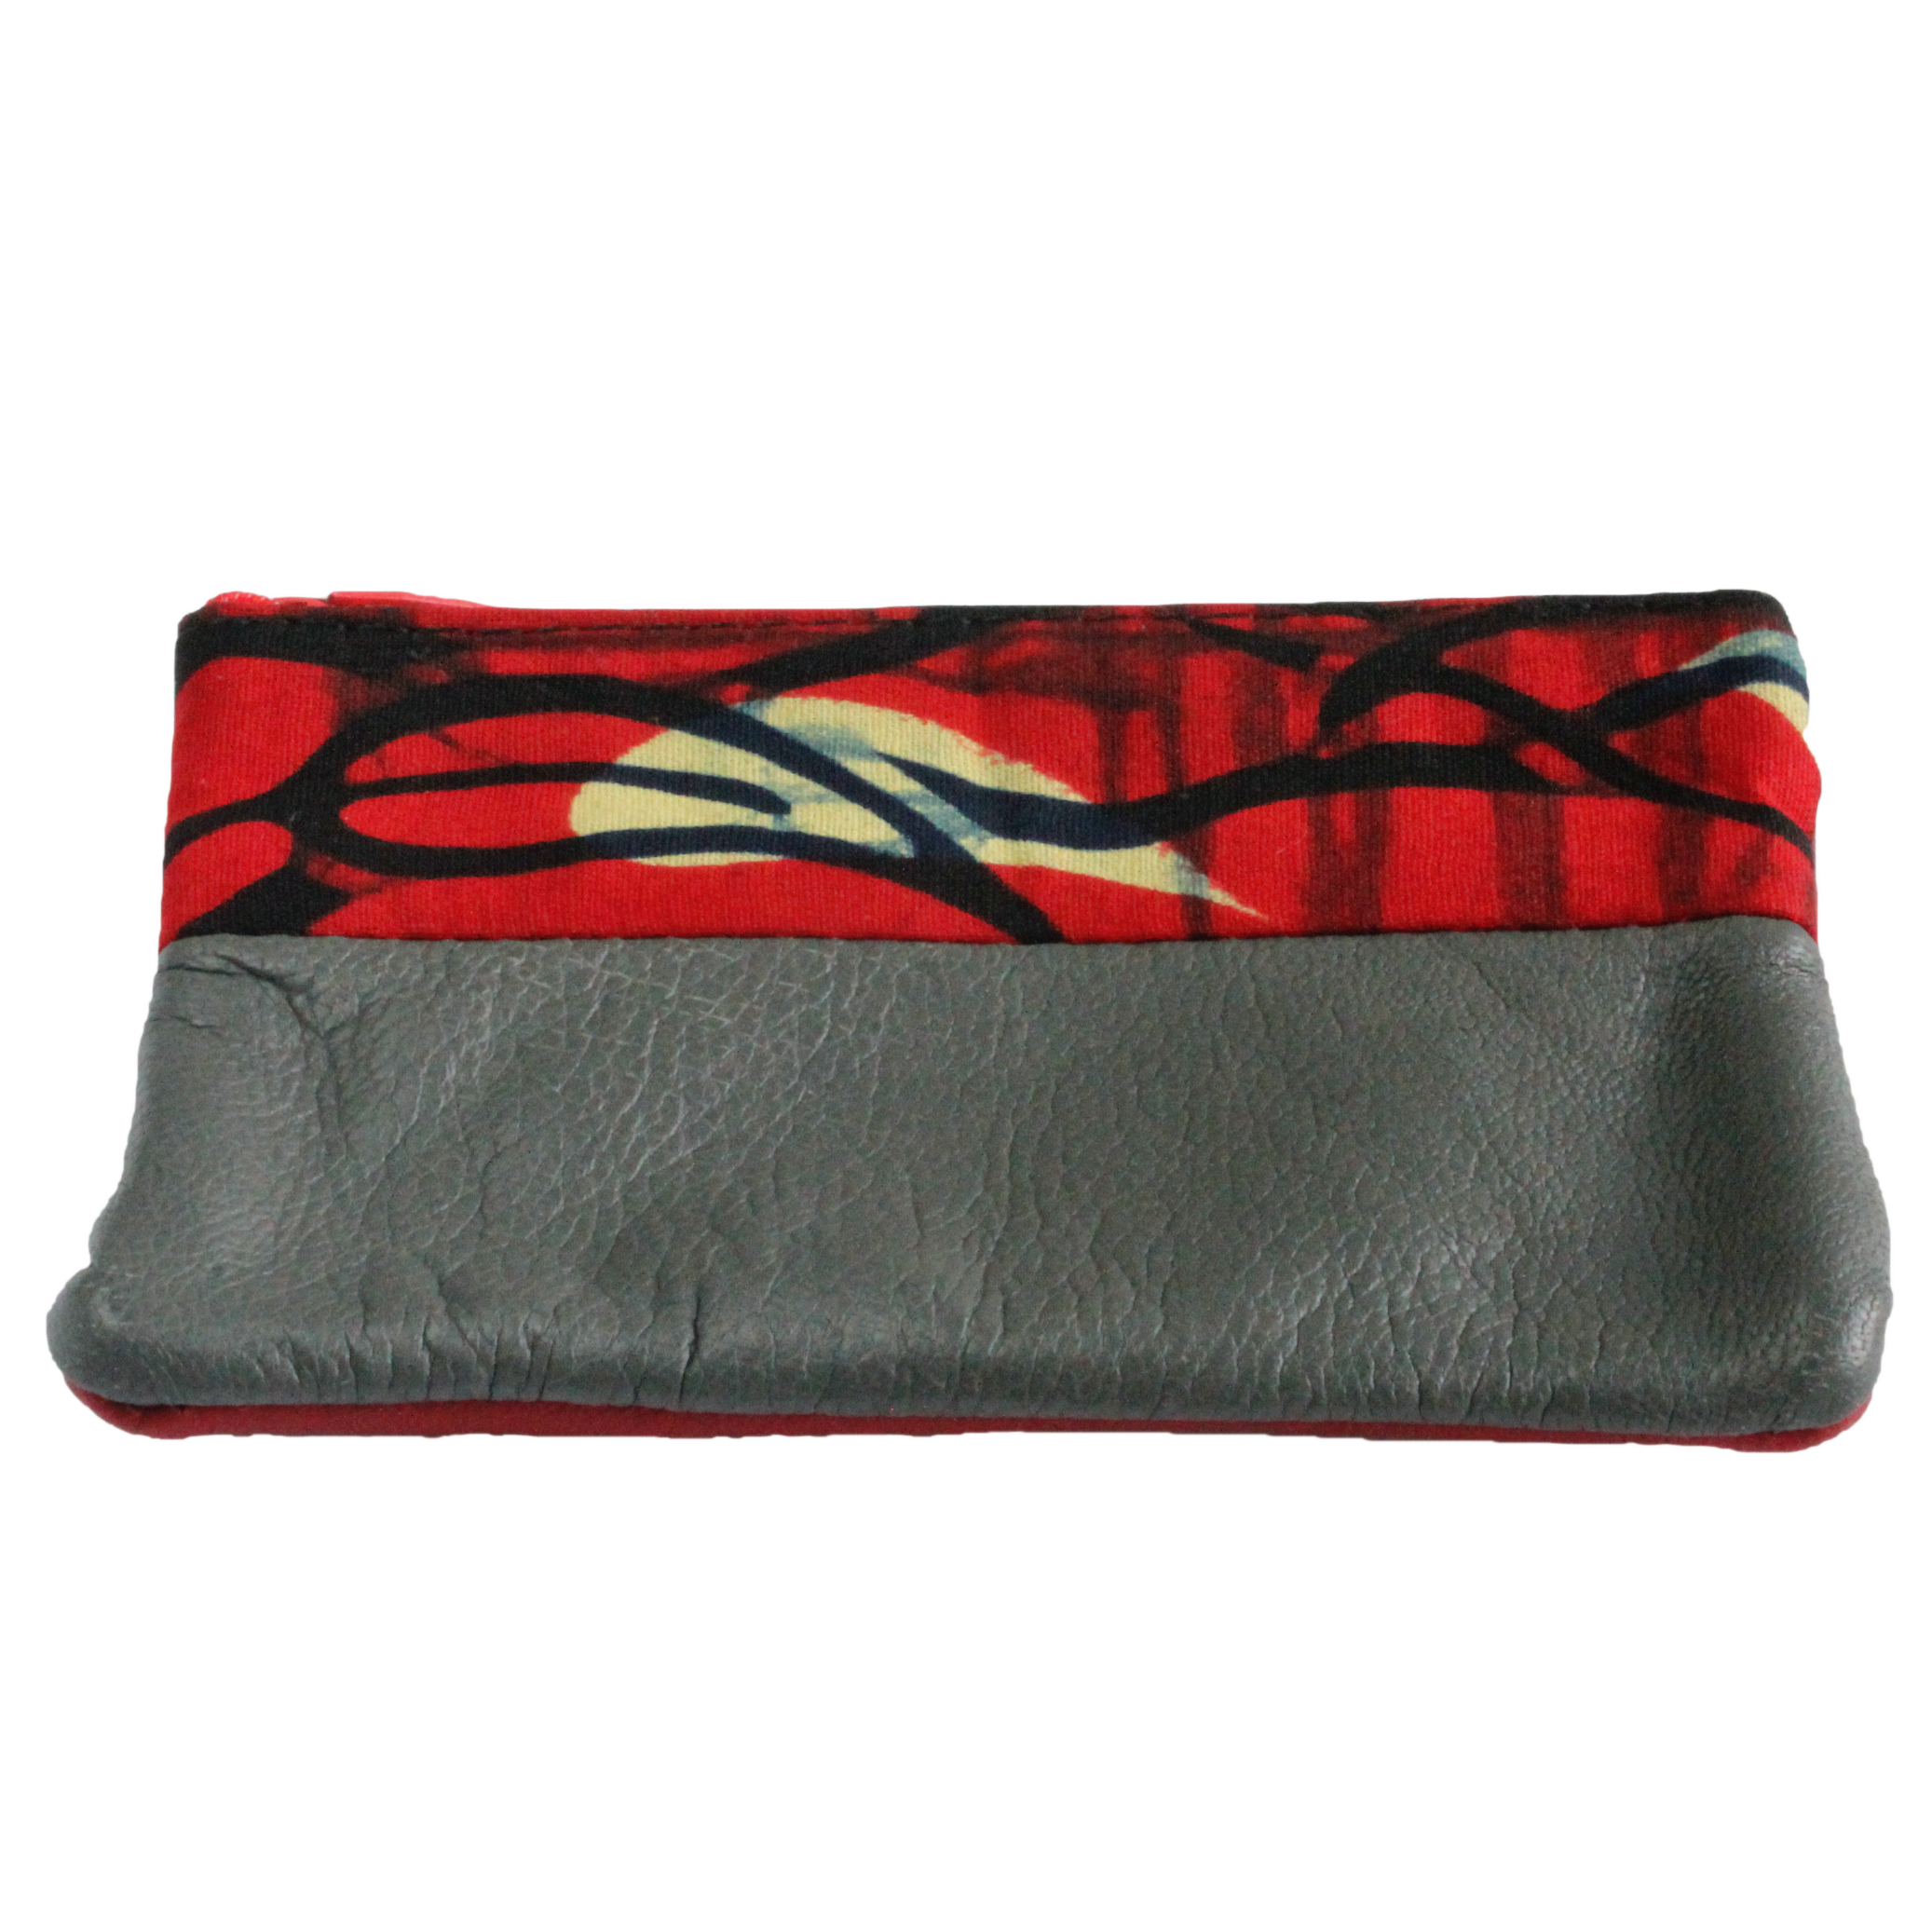 Handmade African coin purse, upcycled leather, African print, Kitenge fashion, Ankara fashion, red, grey, front